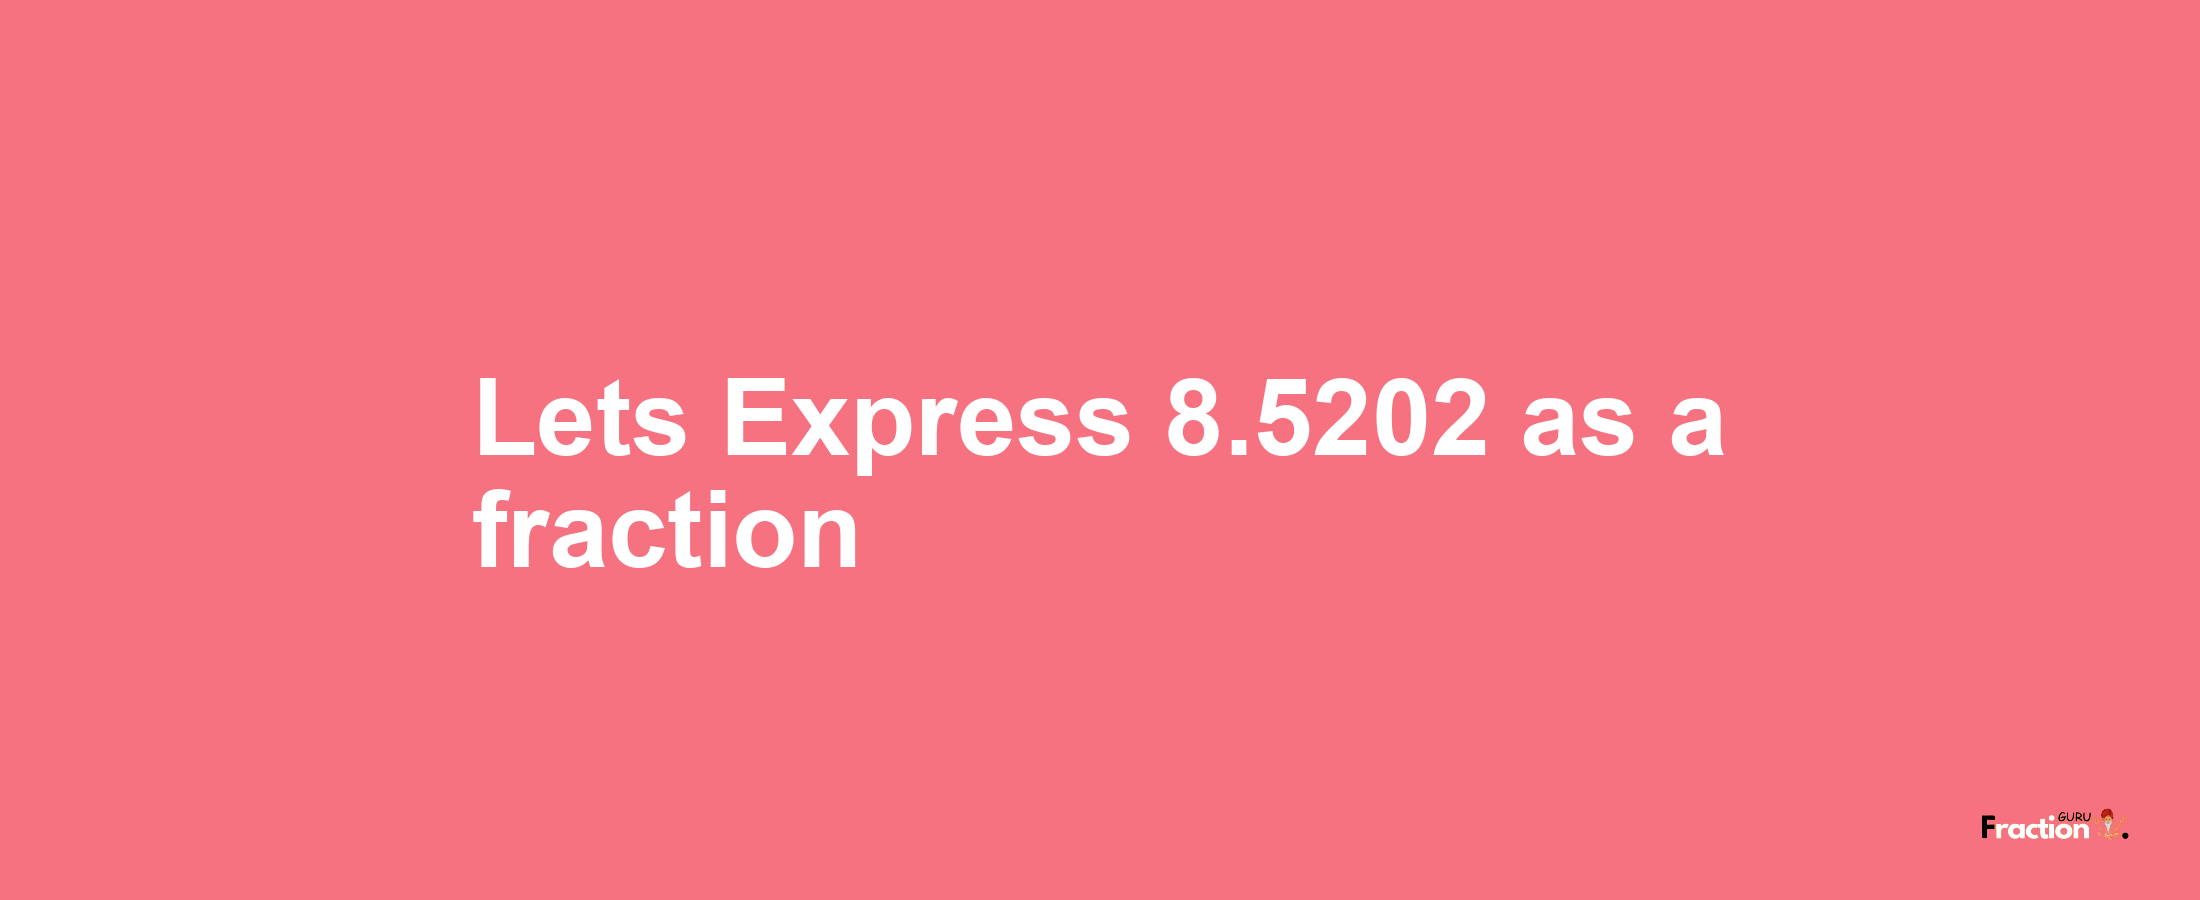 Lets Express 8.5202 as afraction